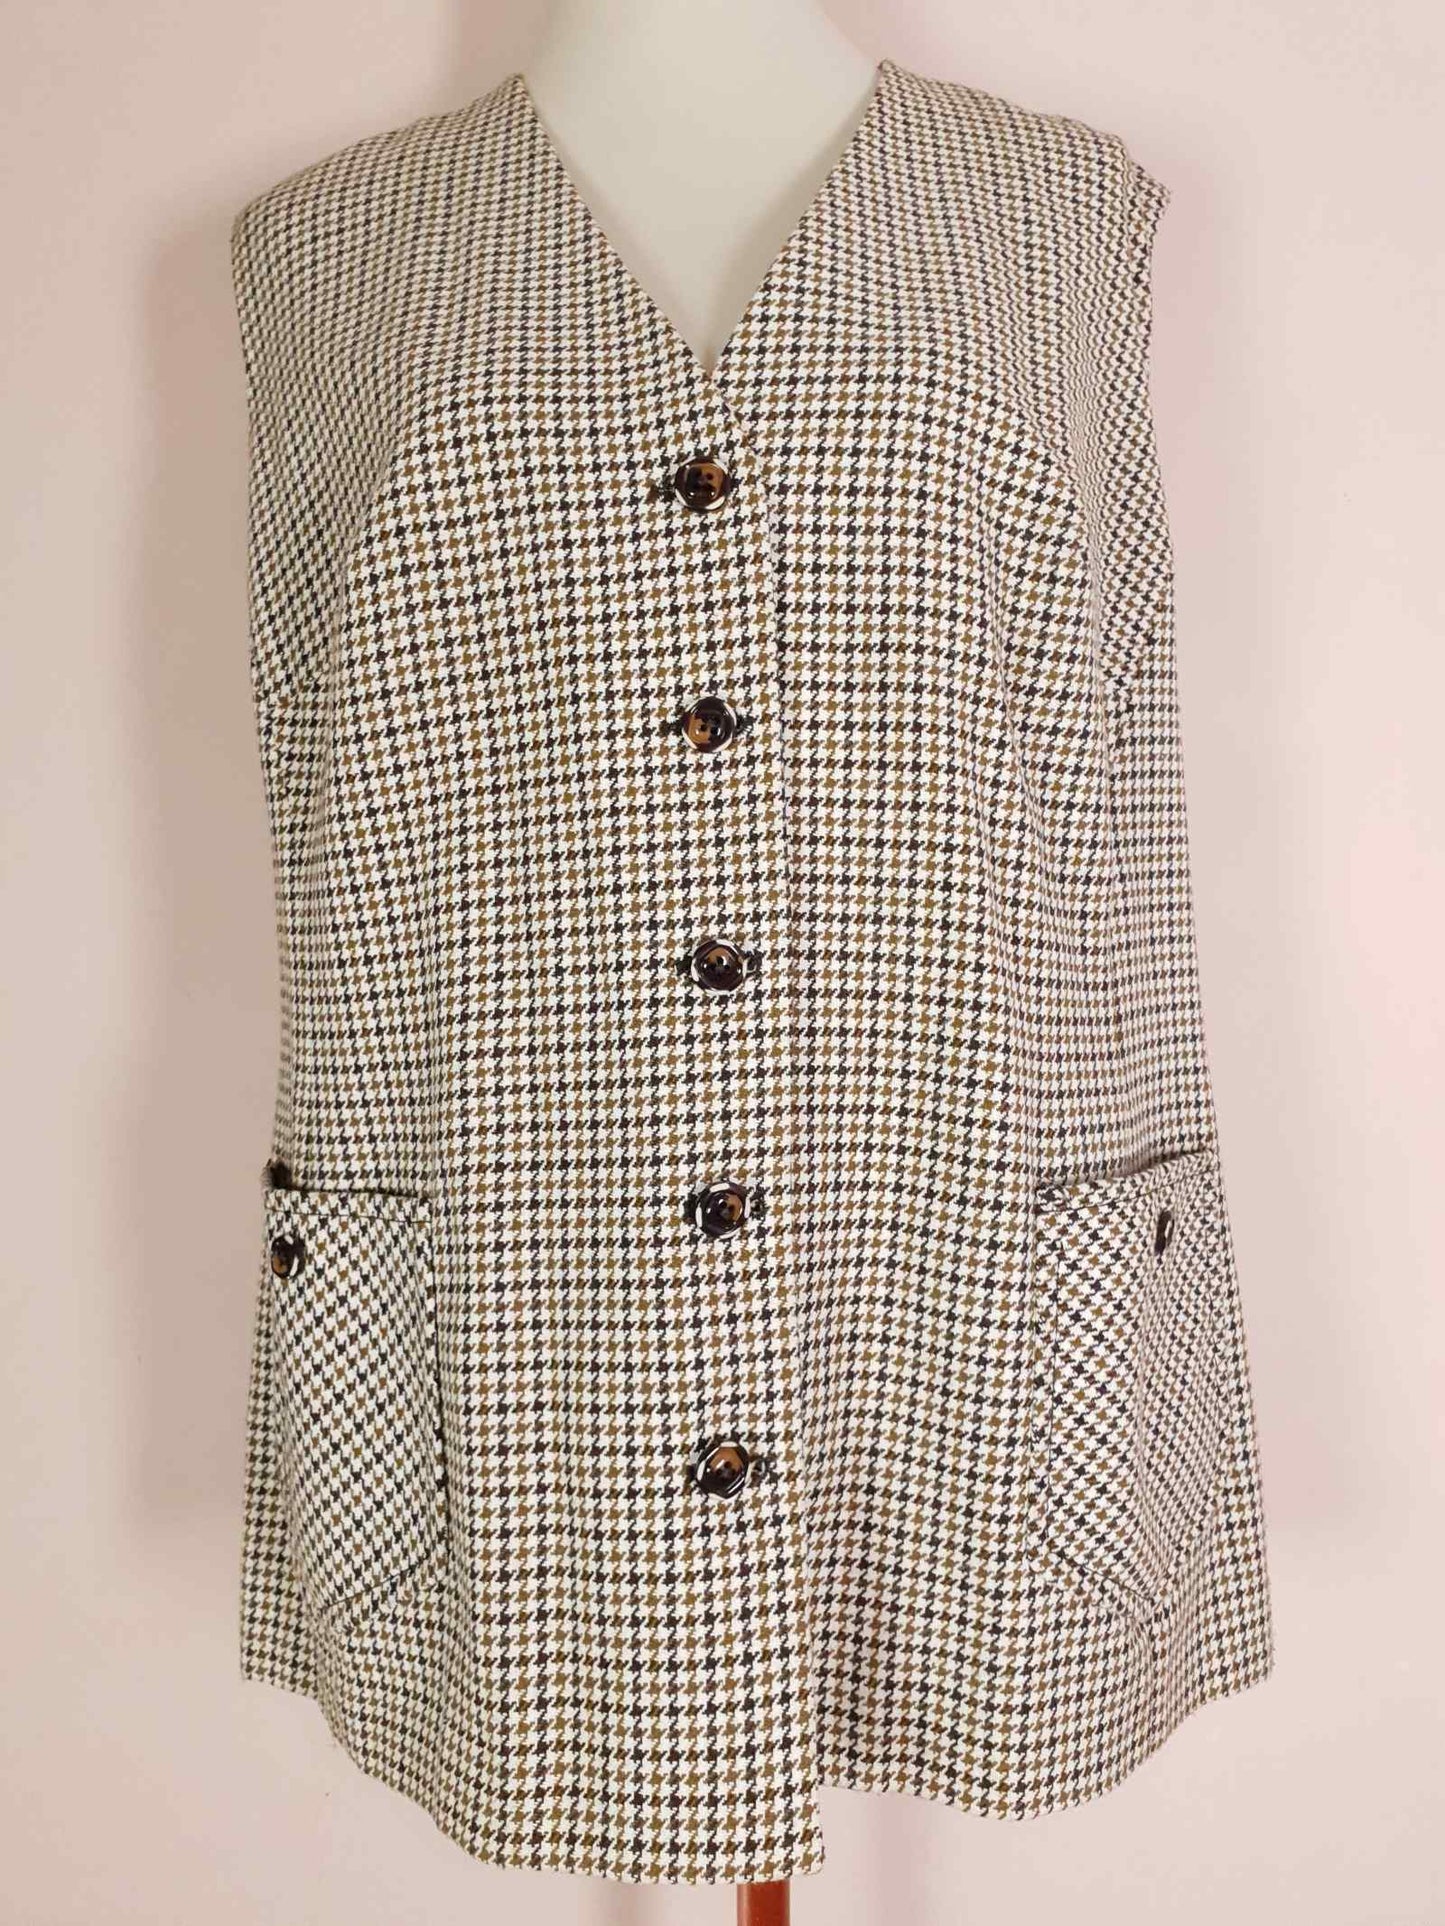 Vintage Wool Brown Houndstooth Waistcoat Check Vest Oversized 1980s - English Classics